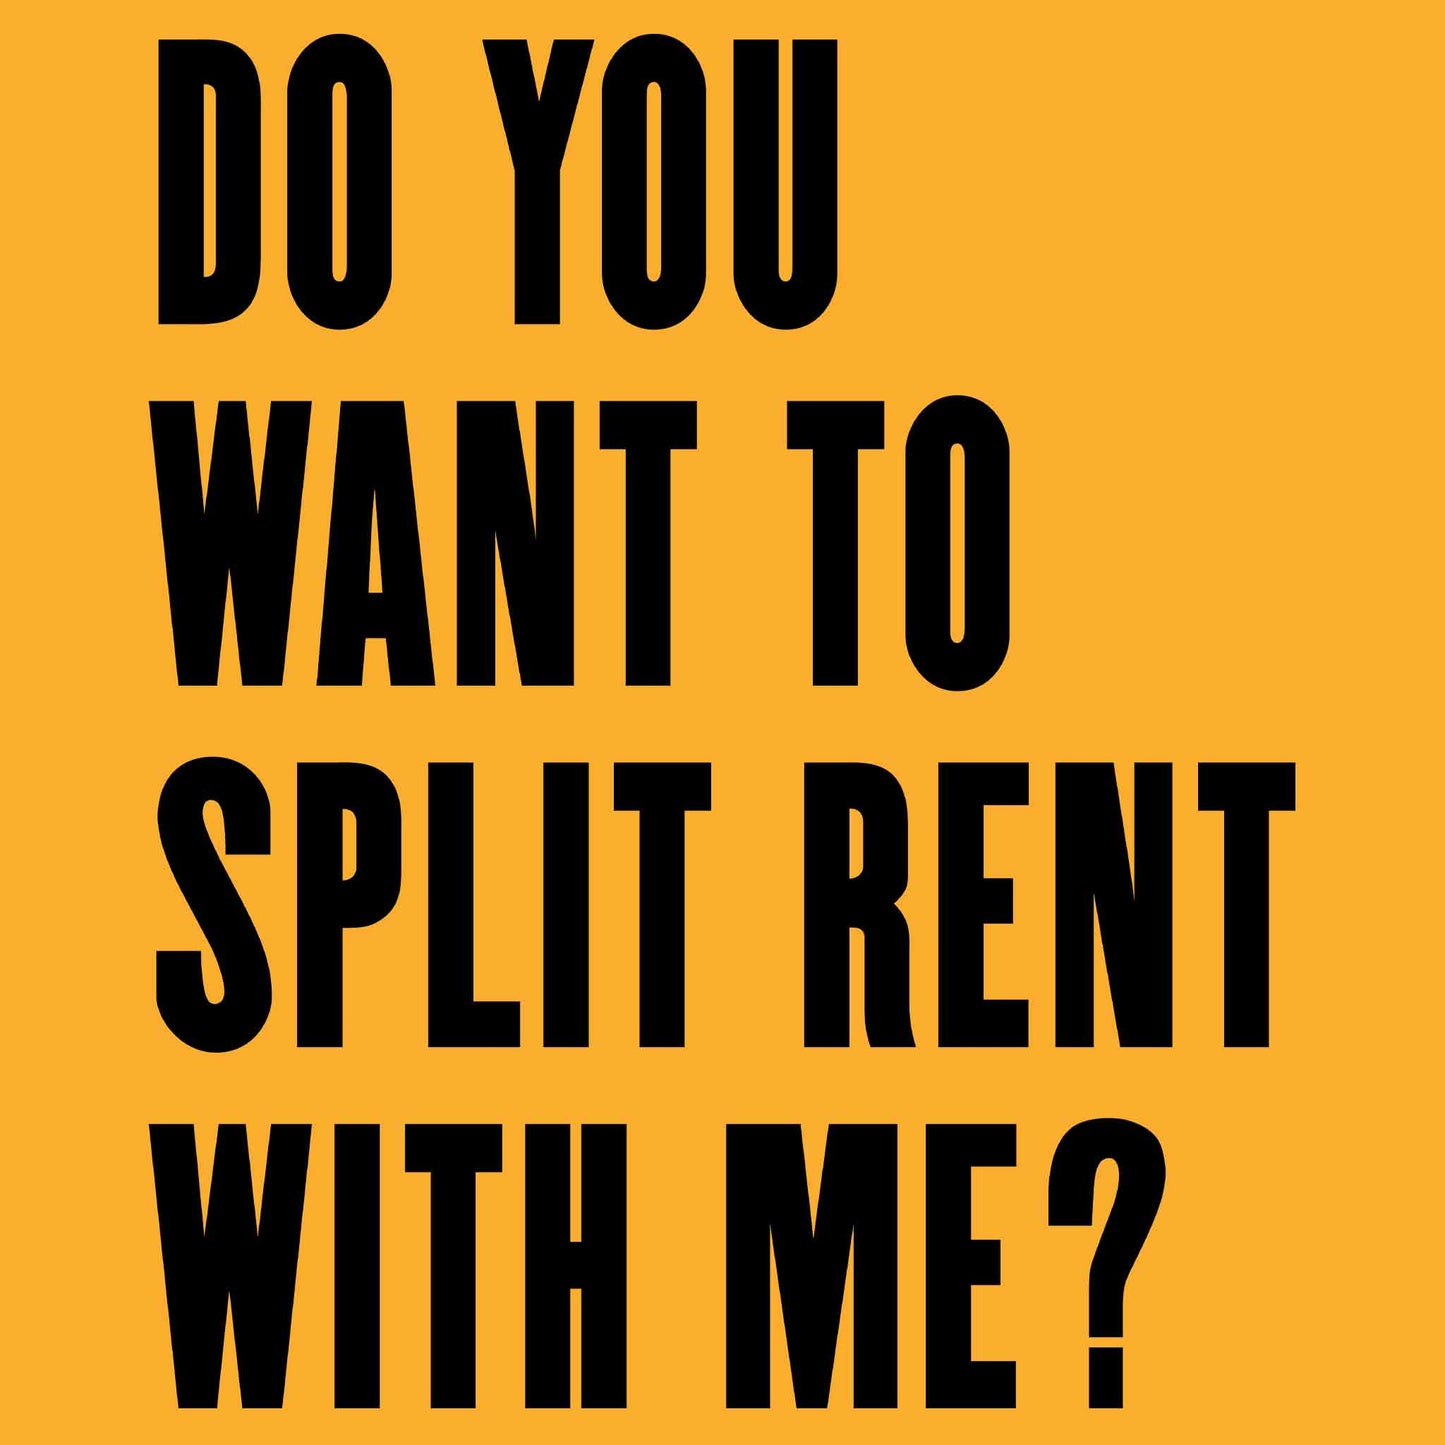 Do You Want To Split Rent With Me? T-Shirt